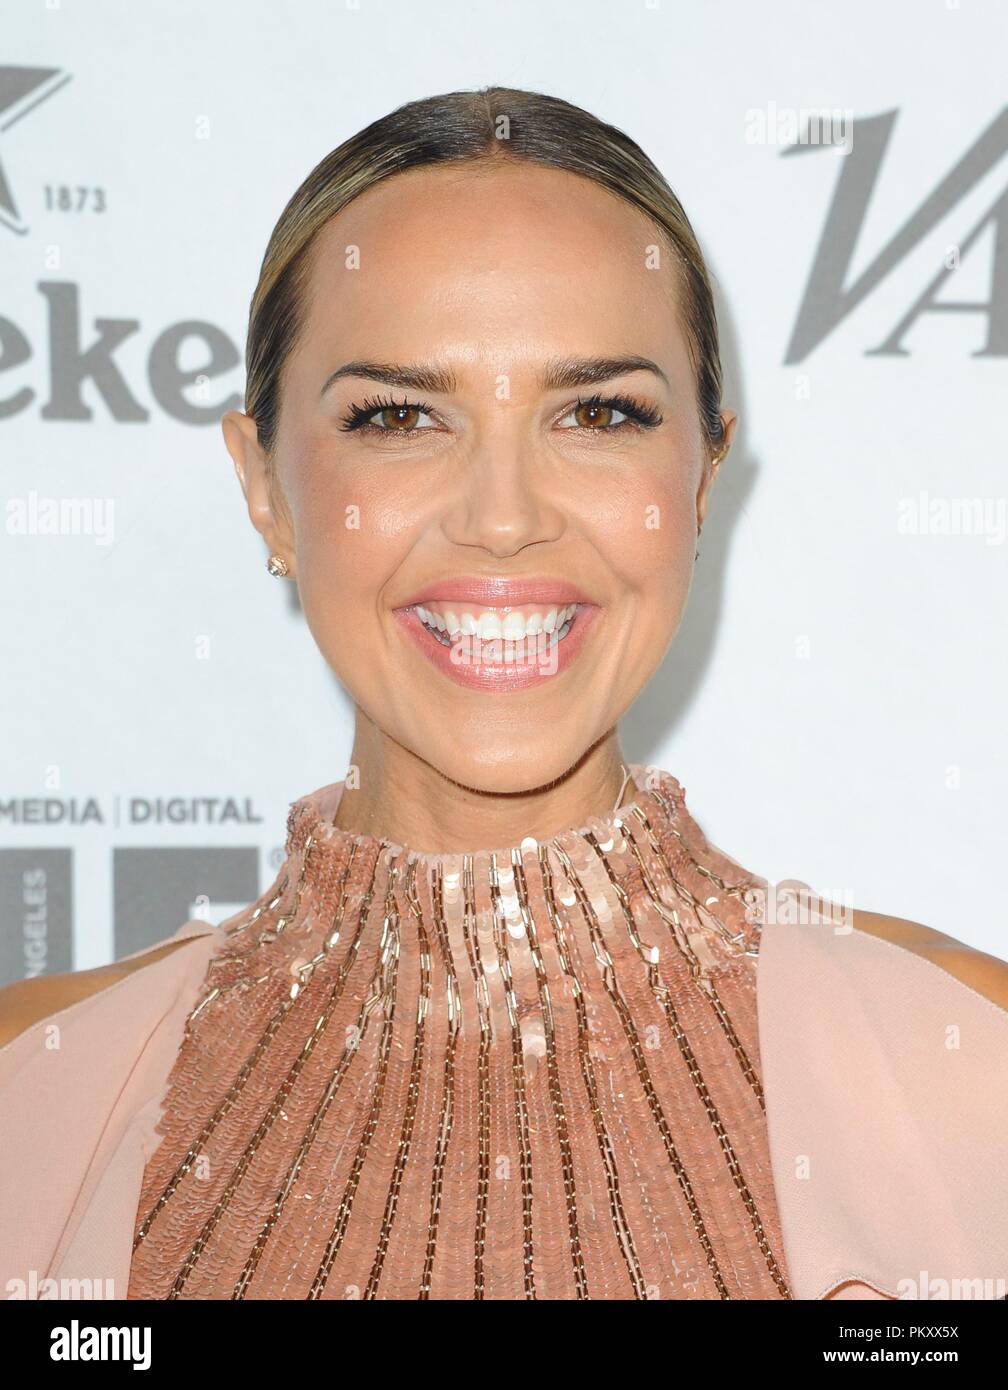 West Hollywood, CA. 15th Sep, 2018. Arielle Kebbel at arrivals for Variety and Women in Film 2018 Television Nominees Celebration Sponsored by Cadillac and Heineken, Cecconi's, West Hollywood, CA September 15, 2018. Credit: Elizabeth Goodenough/Everett Collection/Alamy Live News Stock Photo